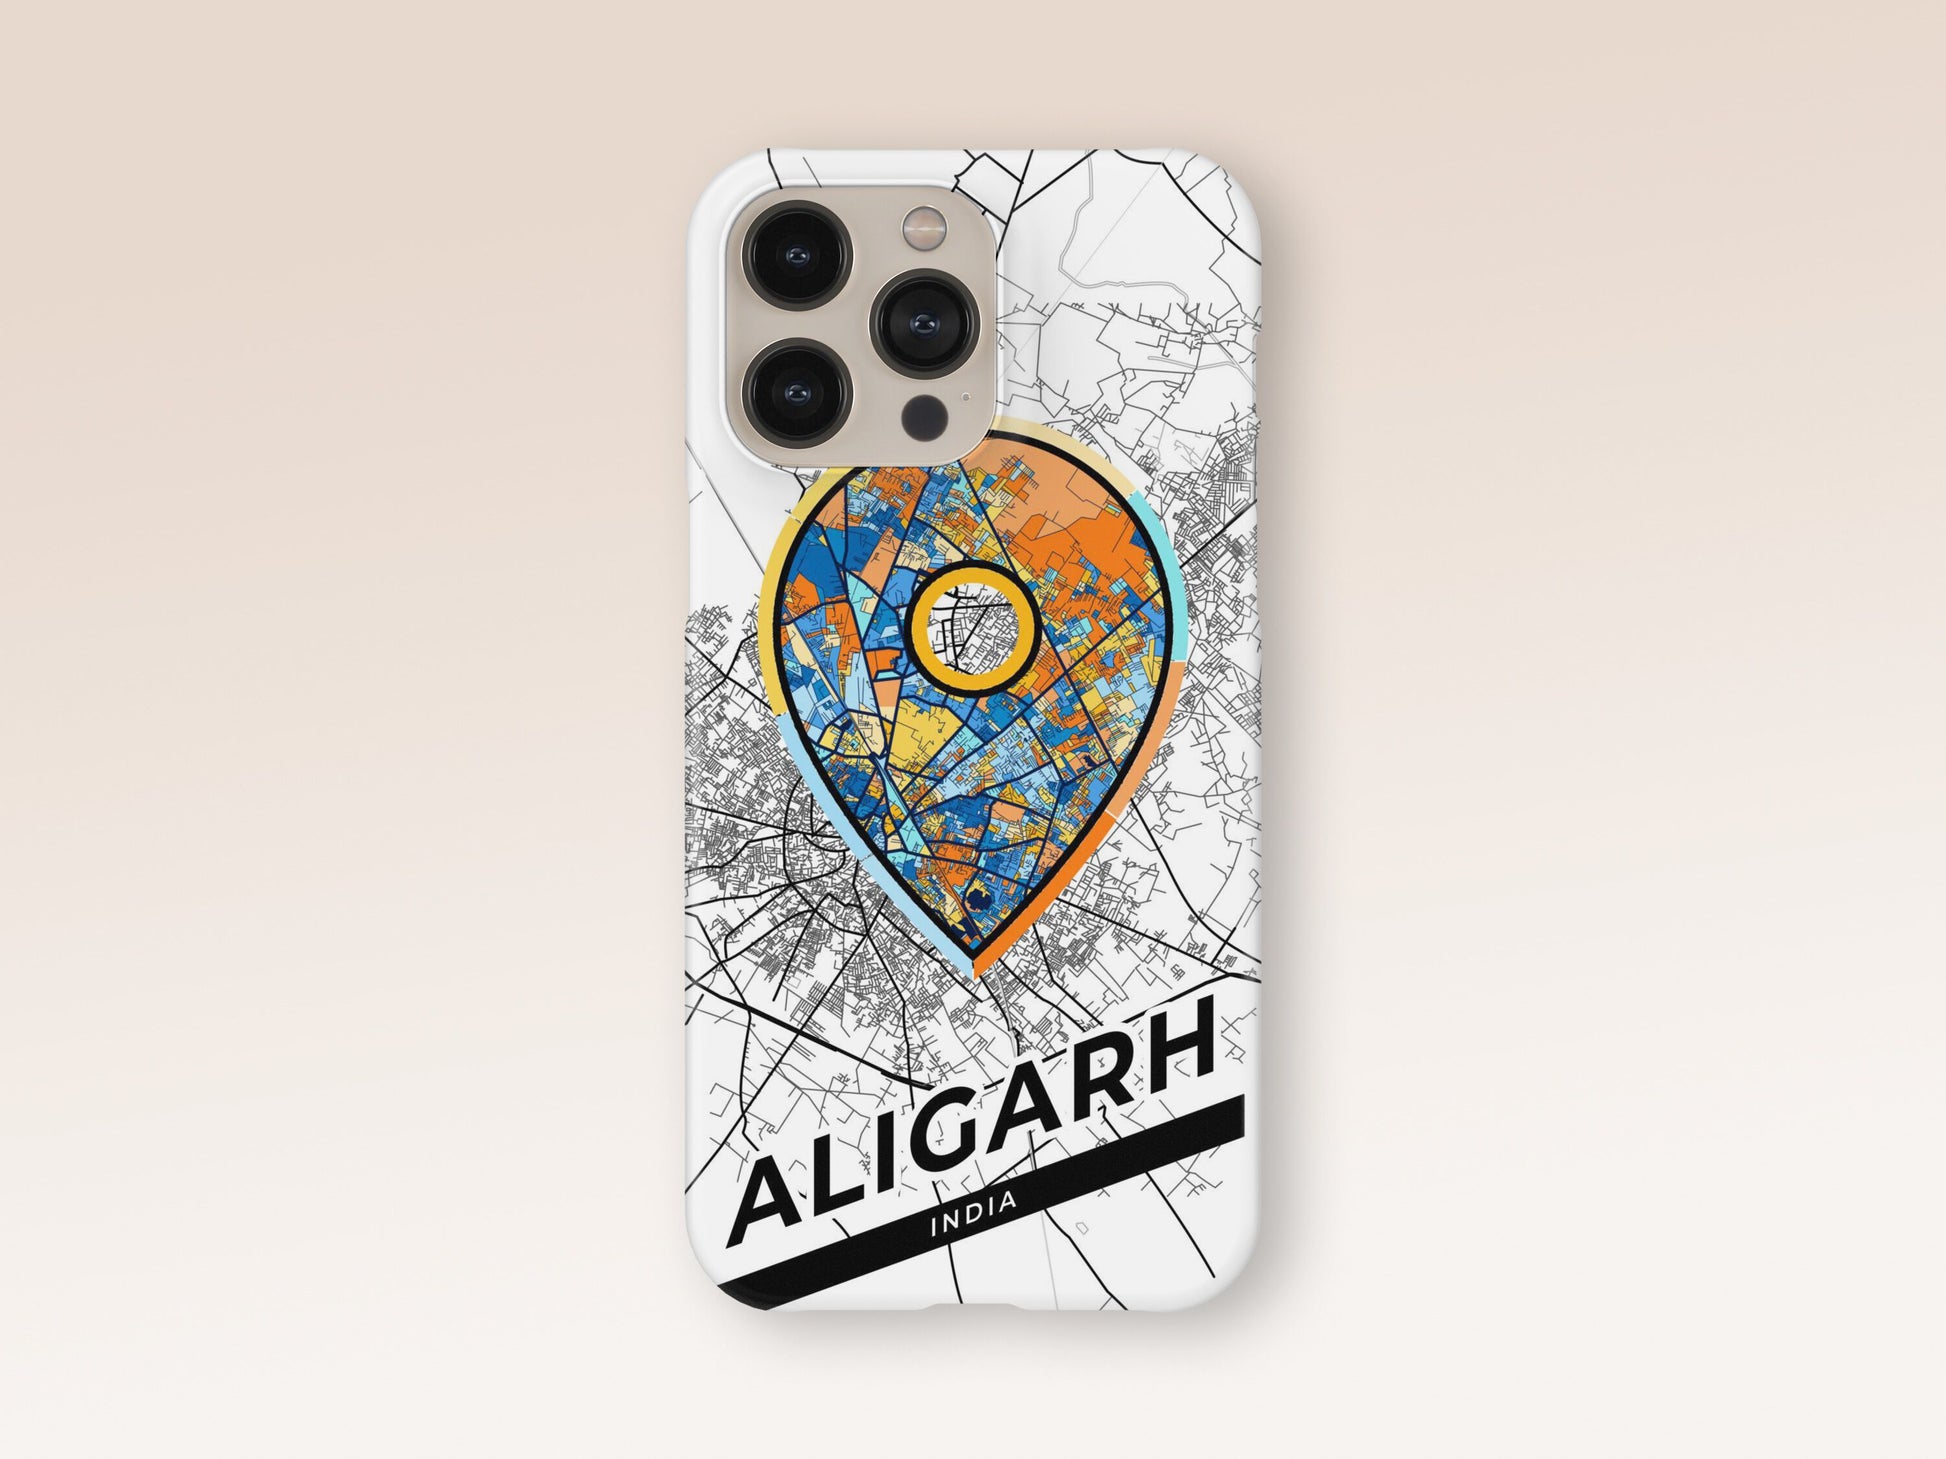 Aligarh India slim phone case with colorful icon. Birthday, wedding or housewarming gift. Couple match cases. 1